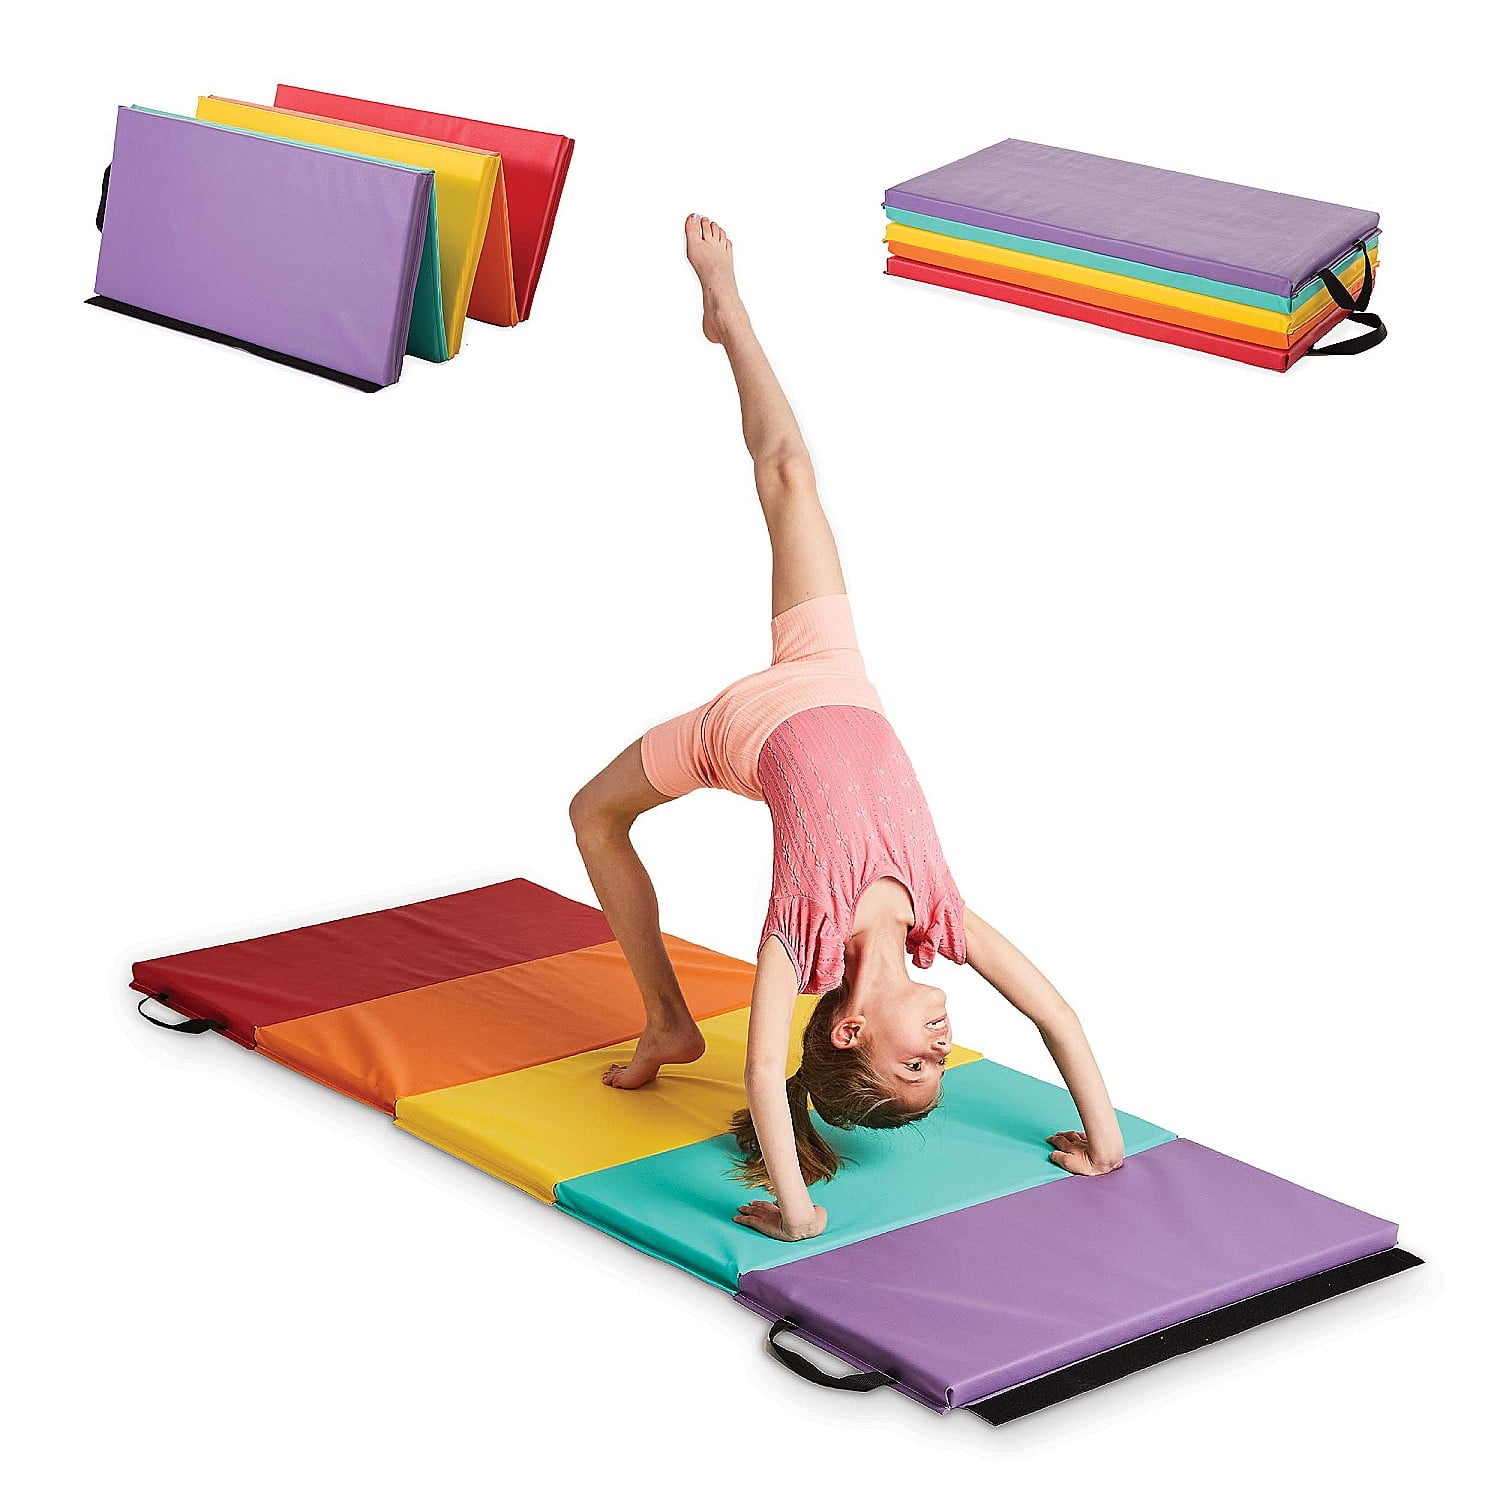 Gymnastic Mat Roller 39"x 24"for Kids Tumbling Exercise with Electric Pump 